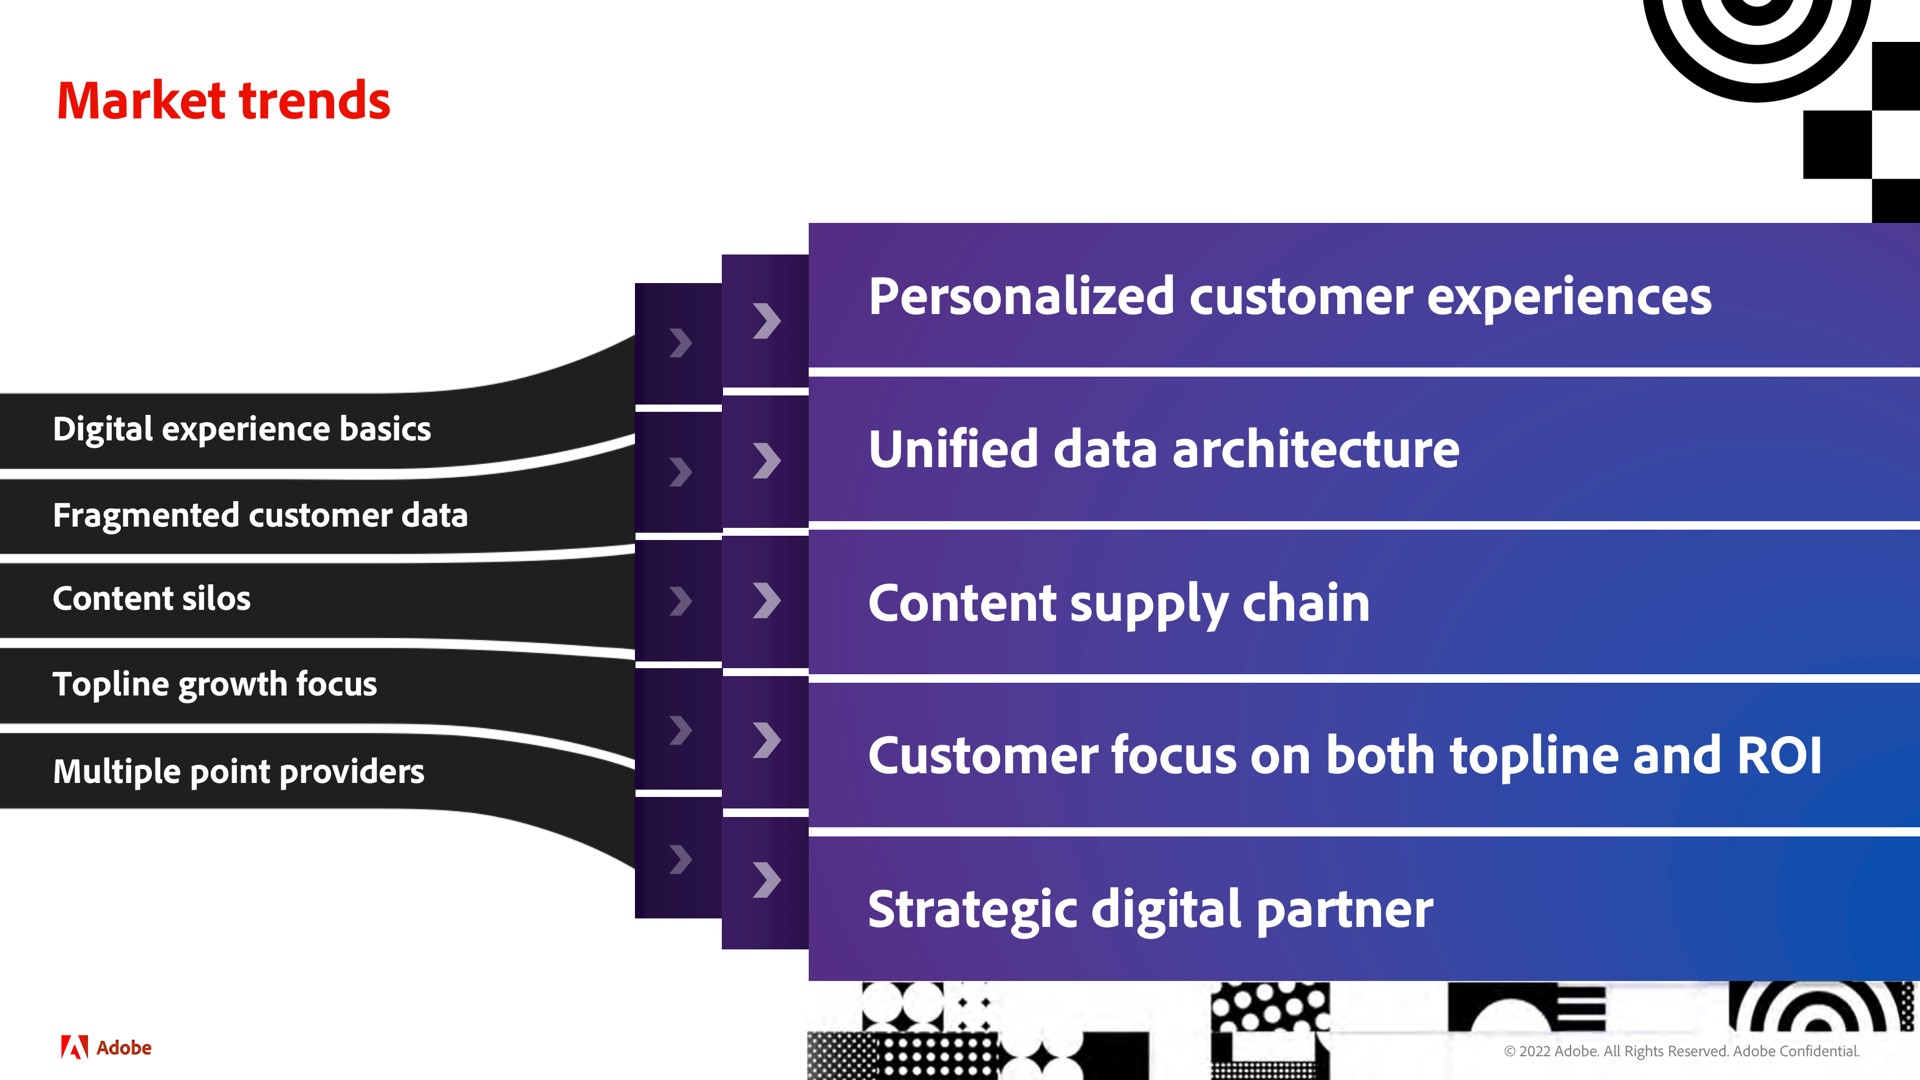 market trends personalized customer experiences unified data architecture content supply chain customer focus on both topline and roi strategic digital partner experience | Adobe